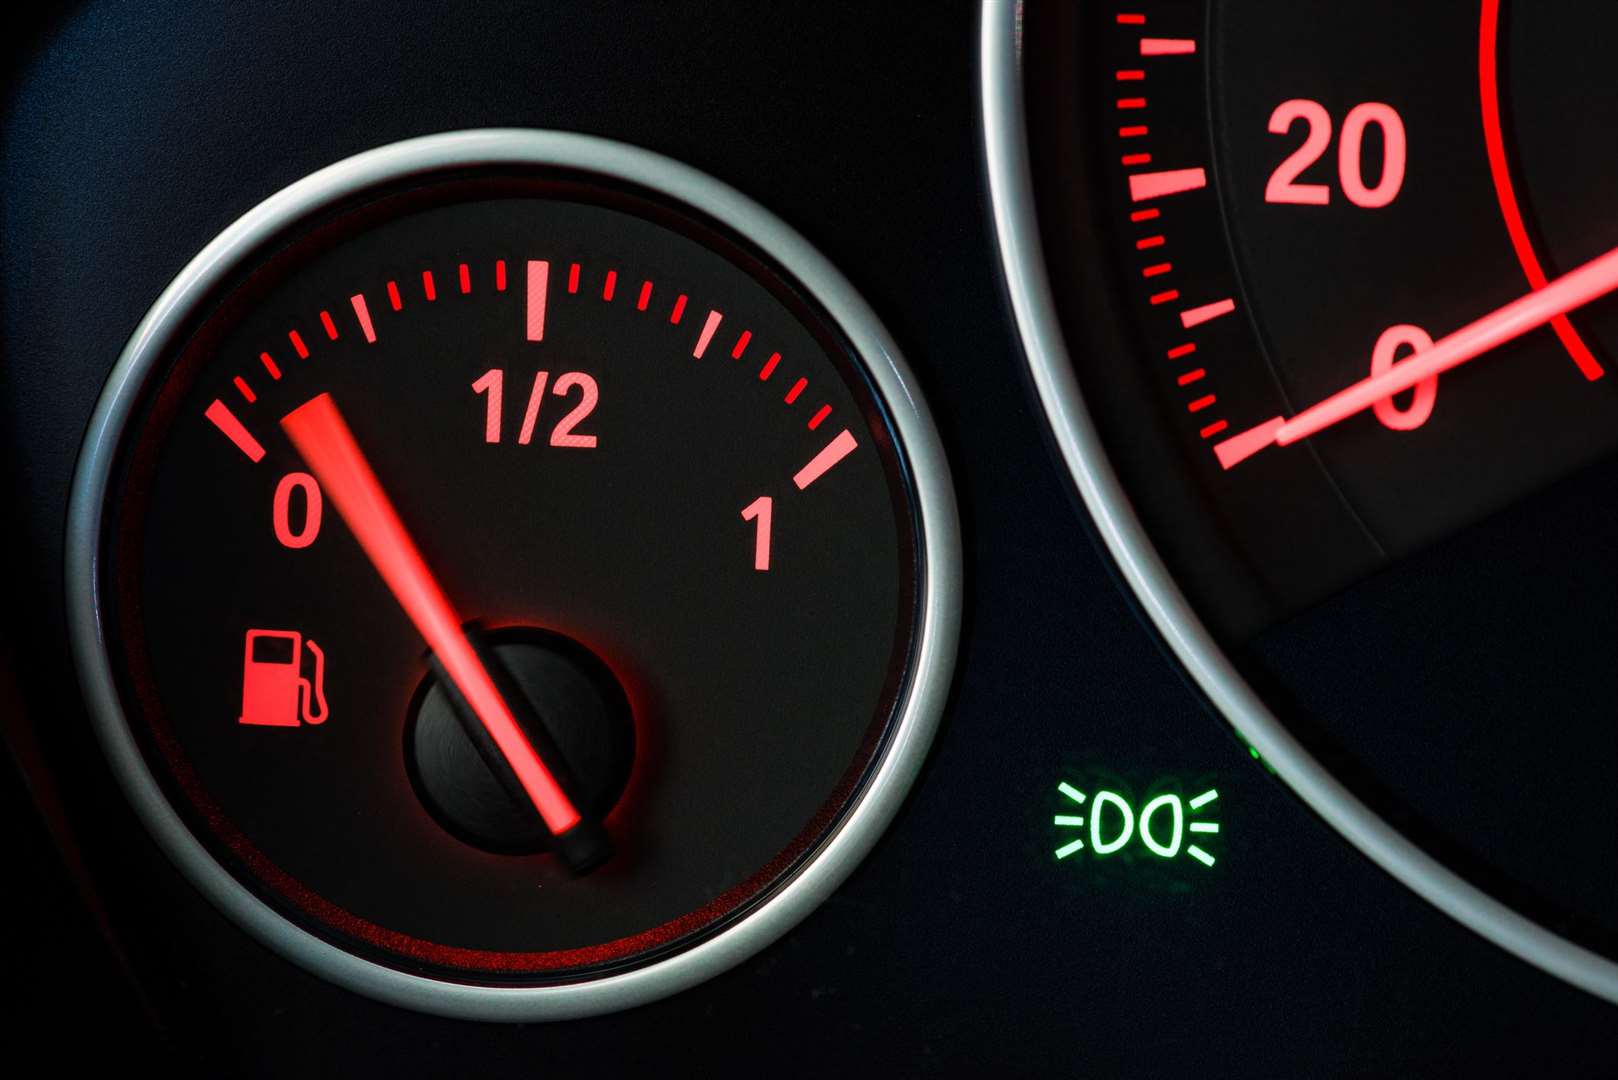 Running out of fuel on Germany's motorways and stopping could incur a fine. Photo: Stock image